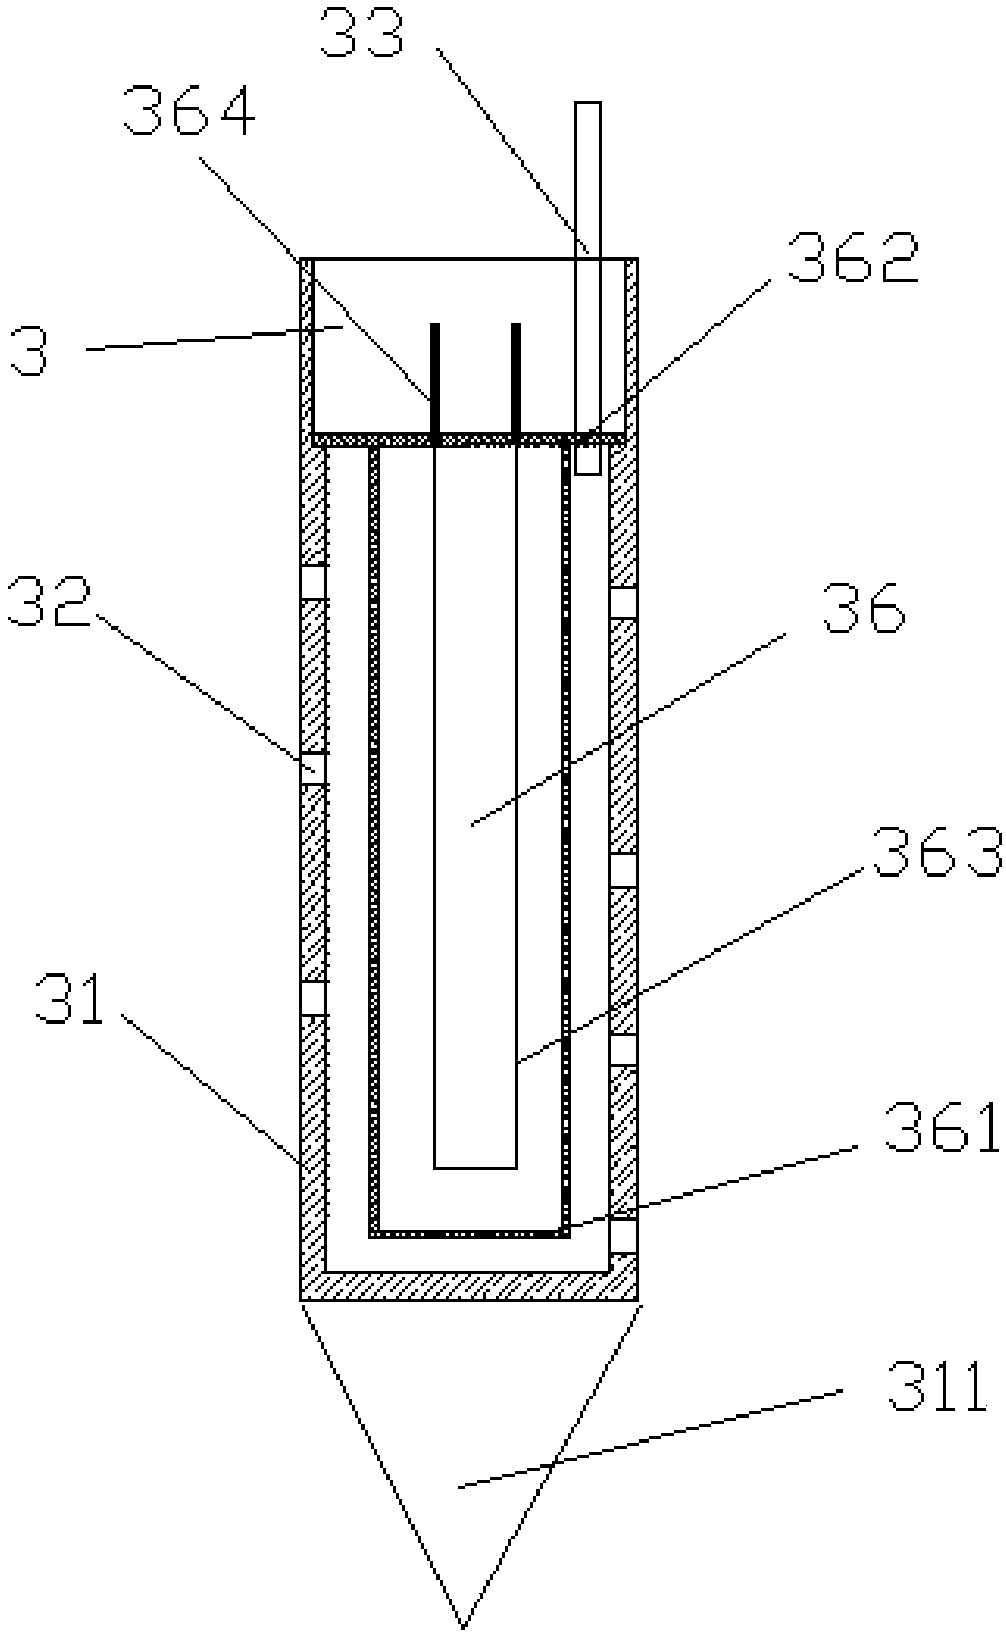 Thermal desorption device for amending and repairing polluted soil